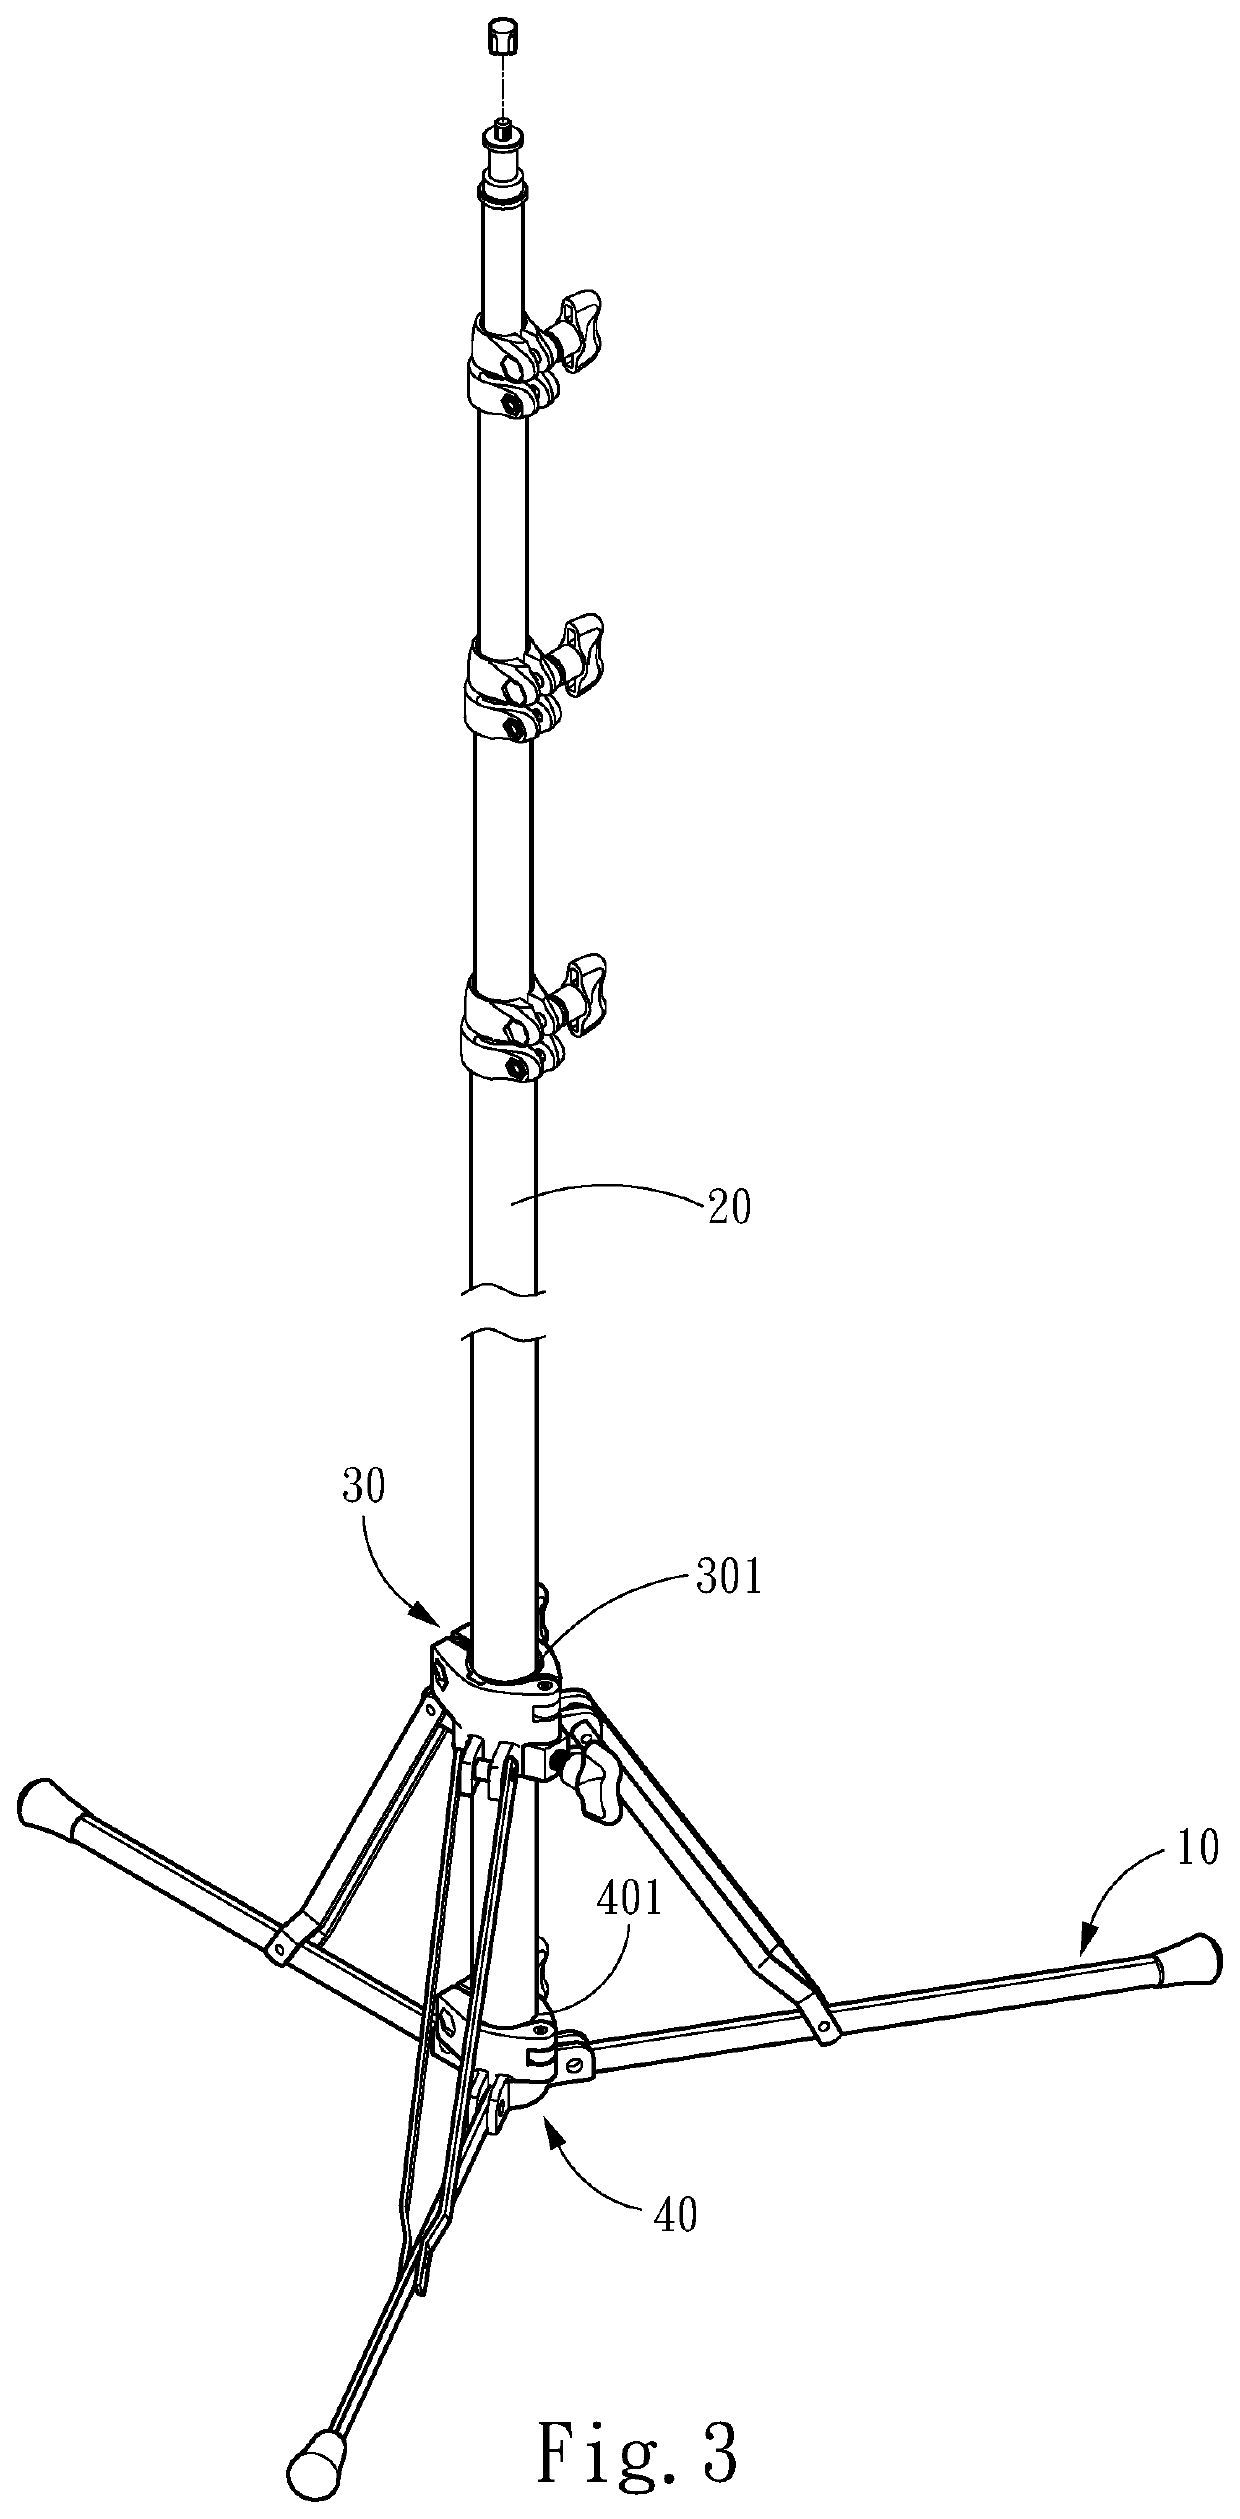 Assembling structure for rod to be fixed or detached with stand